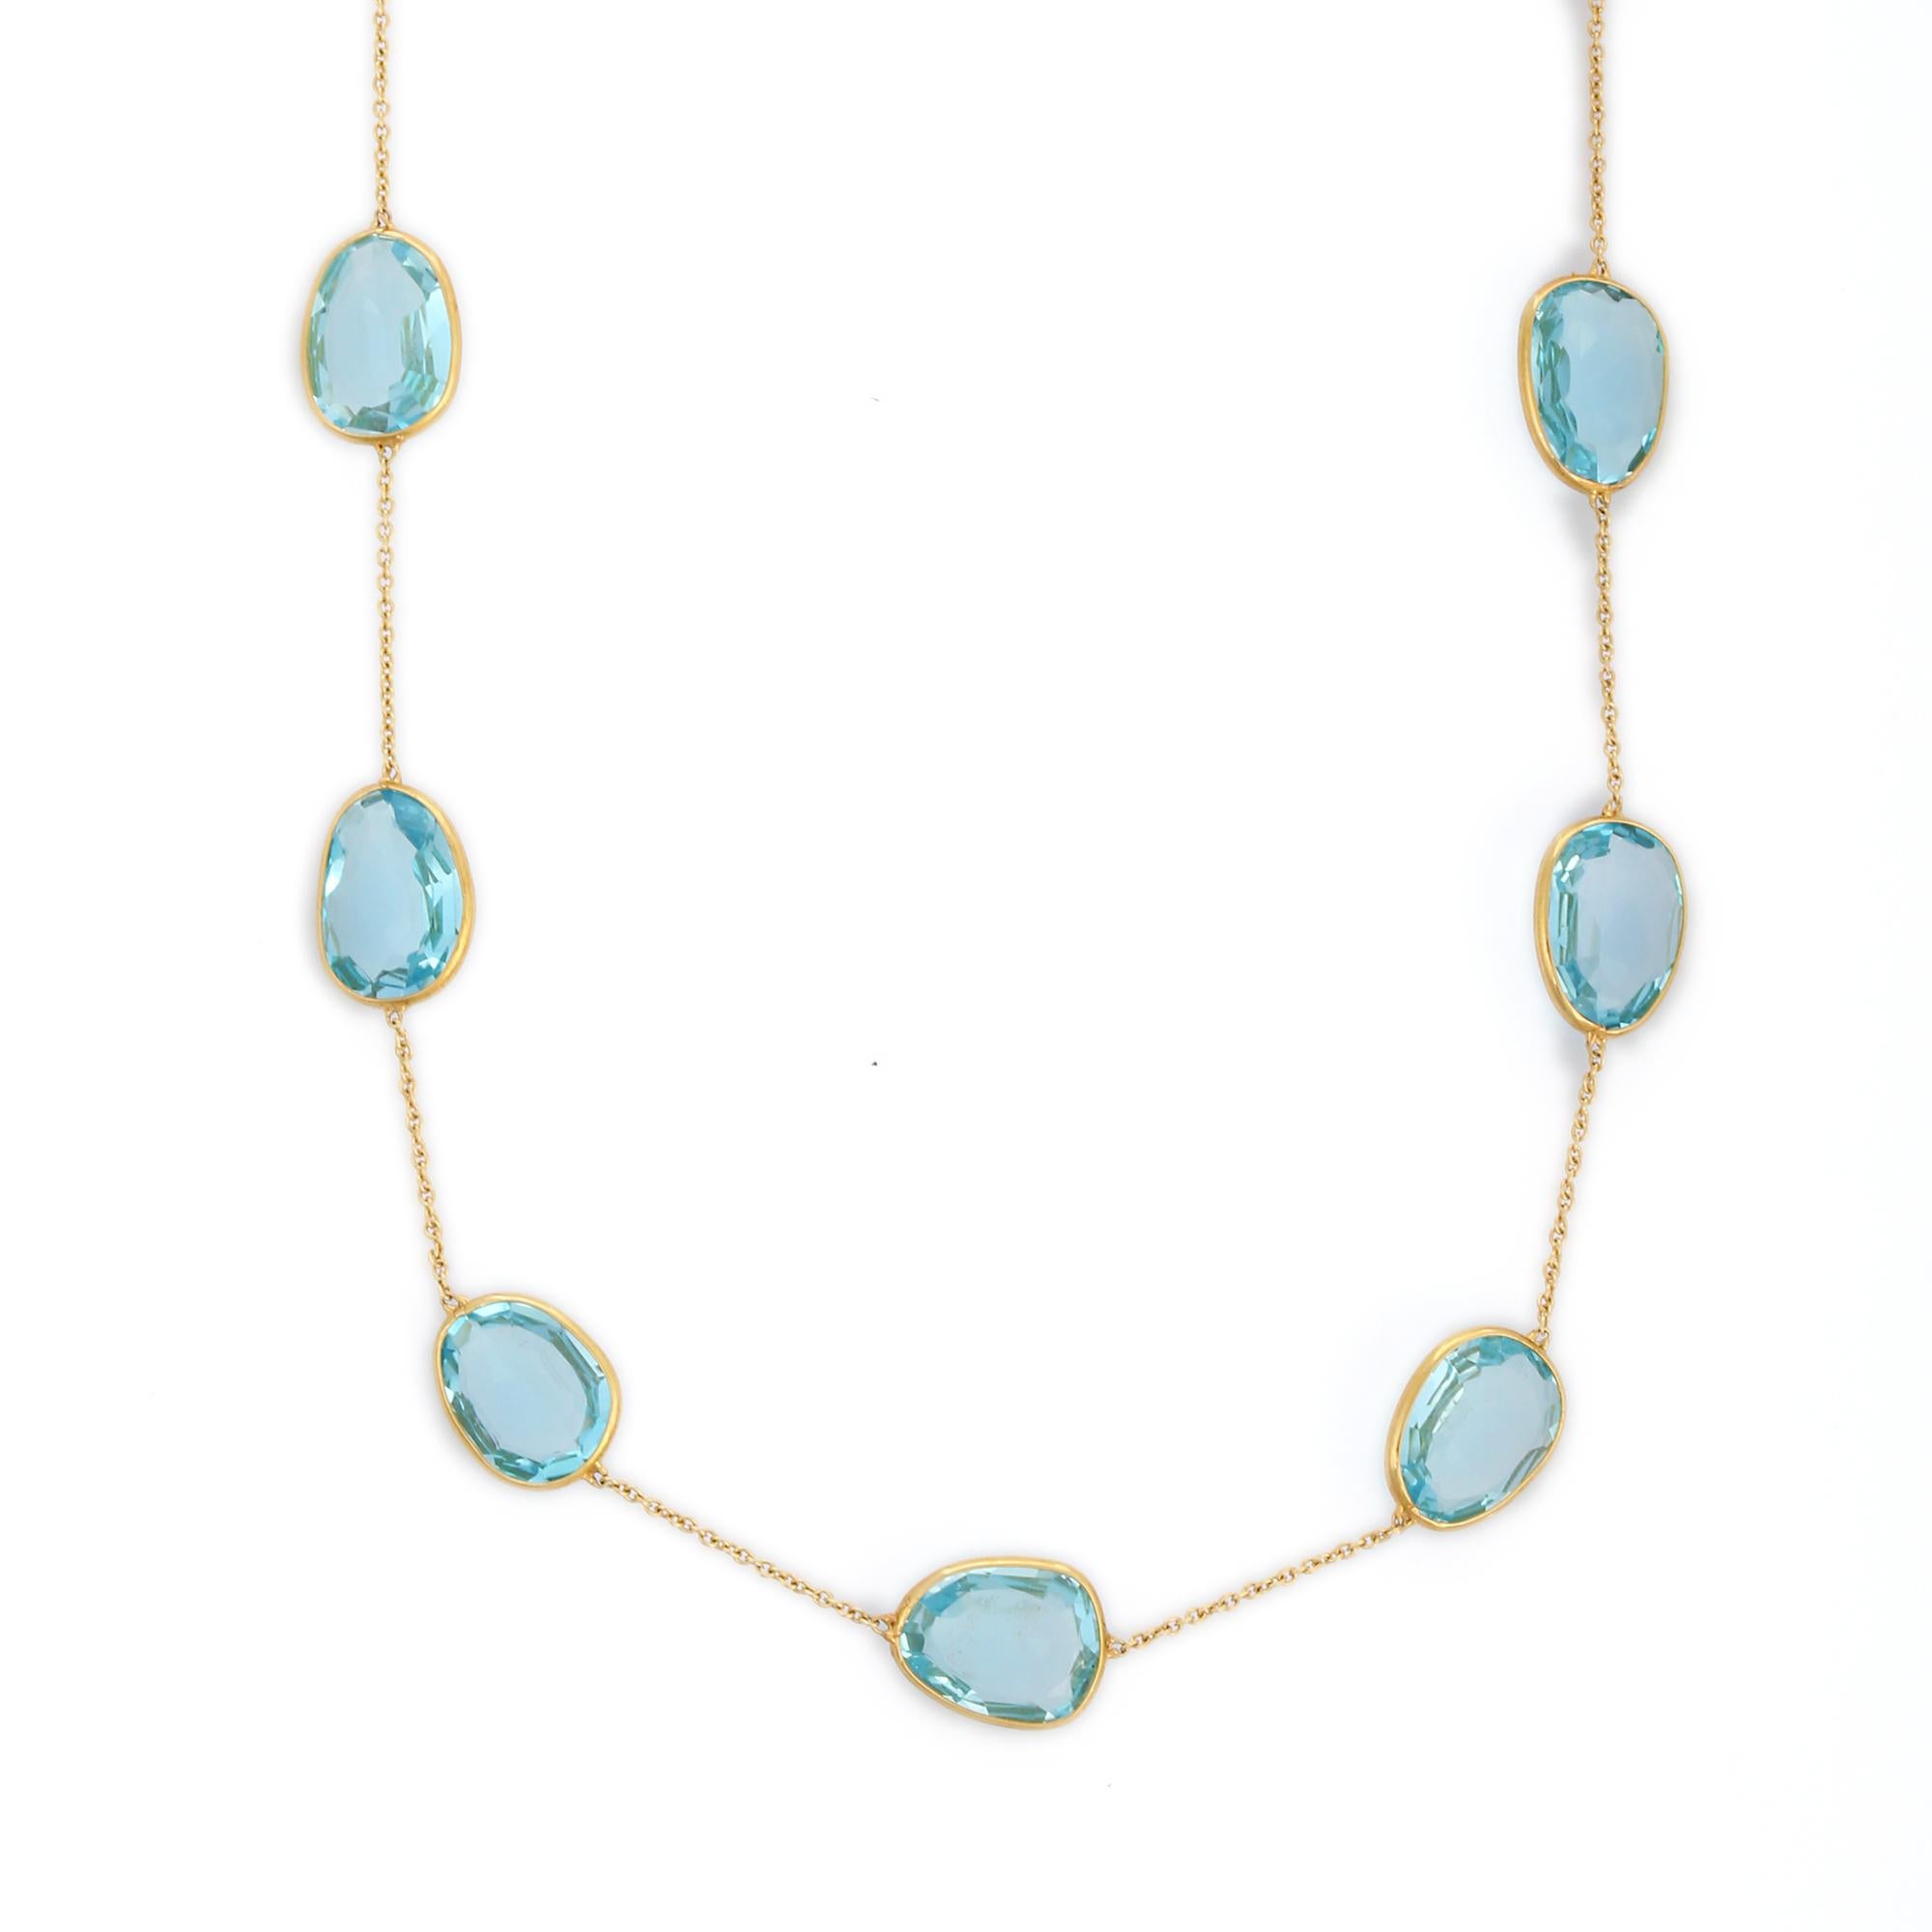 Delicate 47.55 Ct Blue Topaz Chain Necklace, 18K Yellow Gold Necklace In New Condition For Sale In Houston, TX